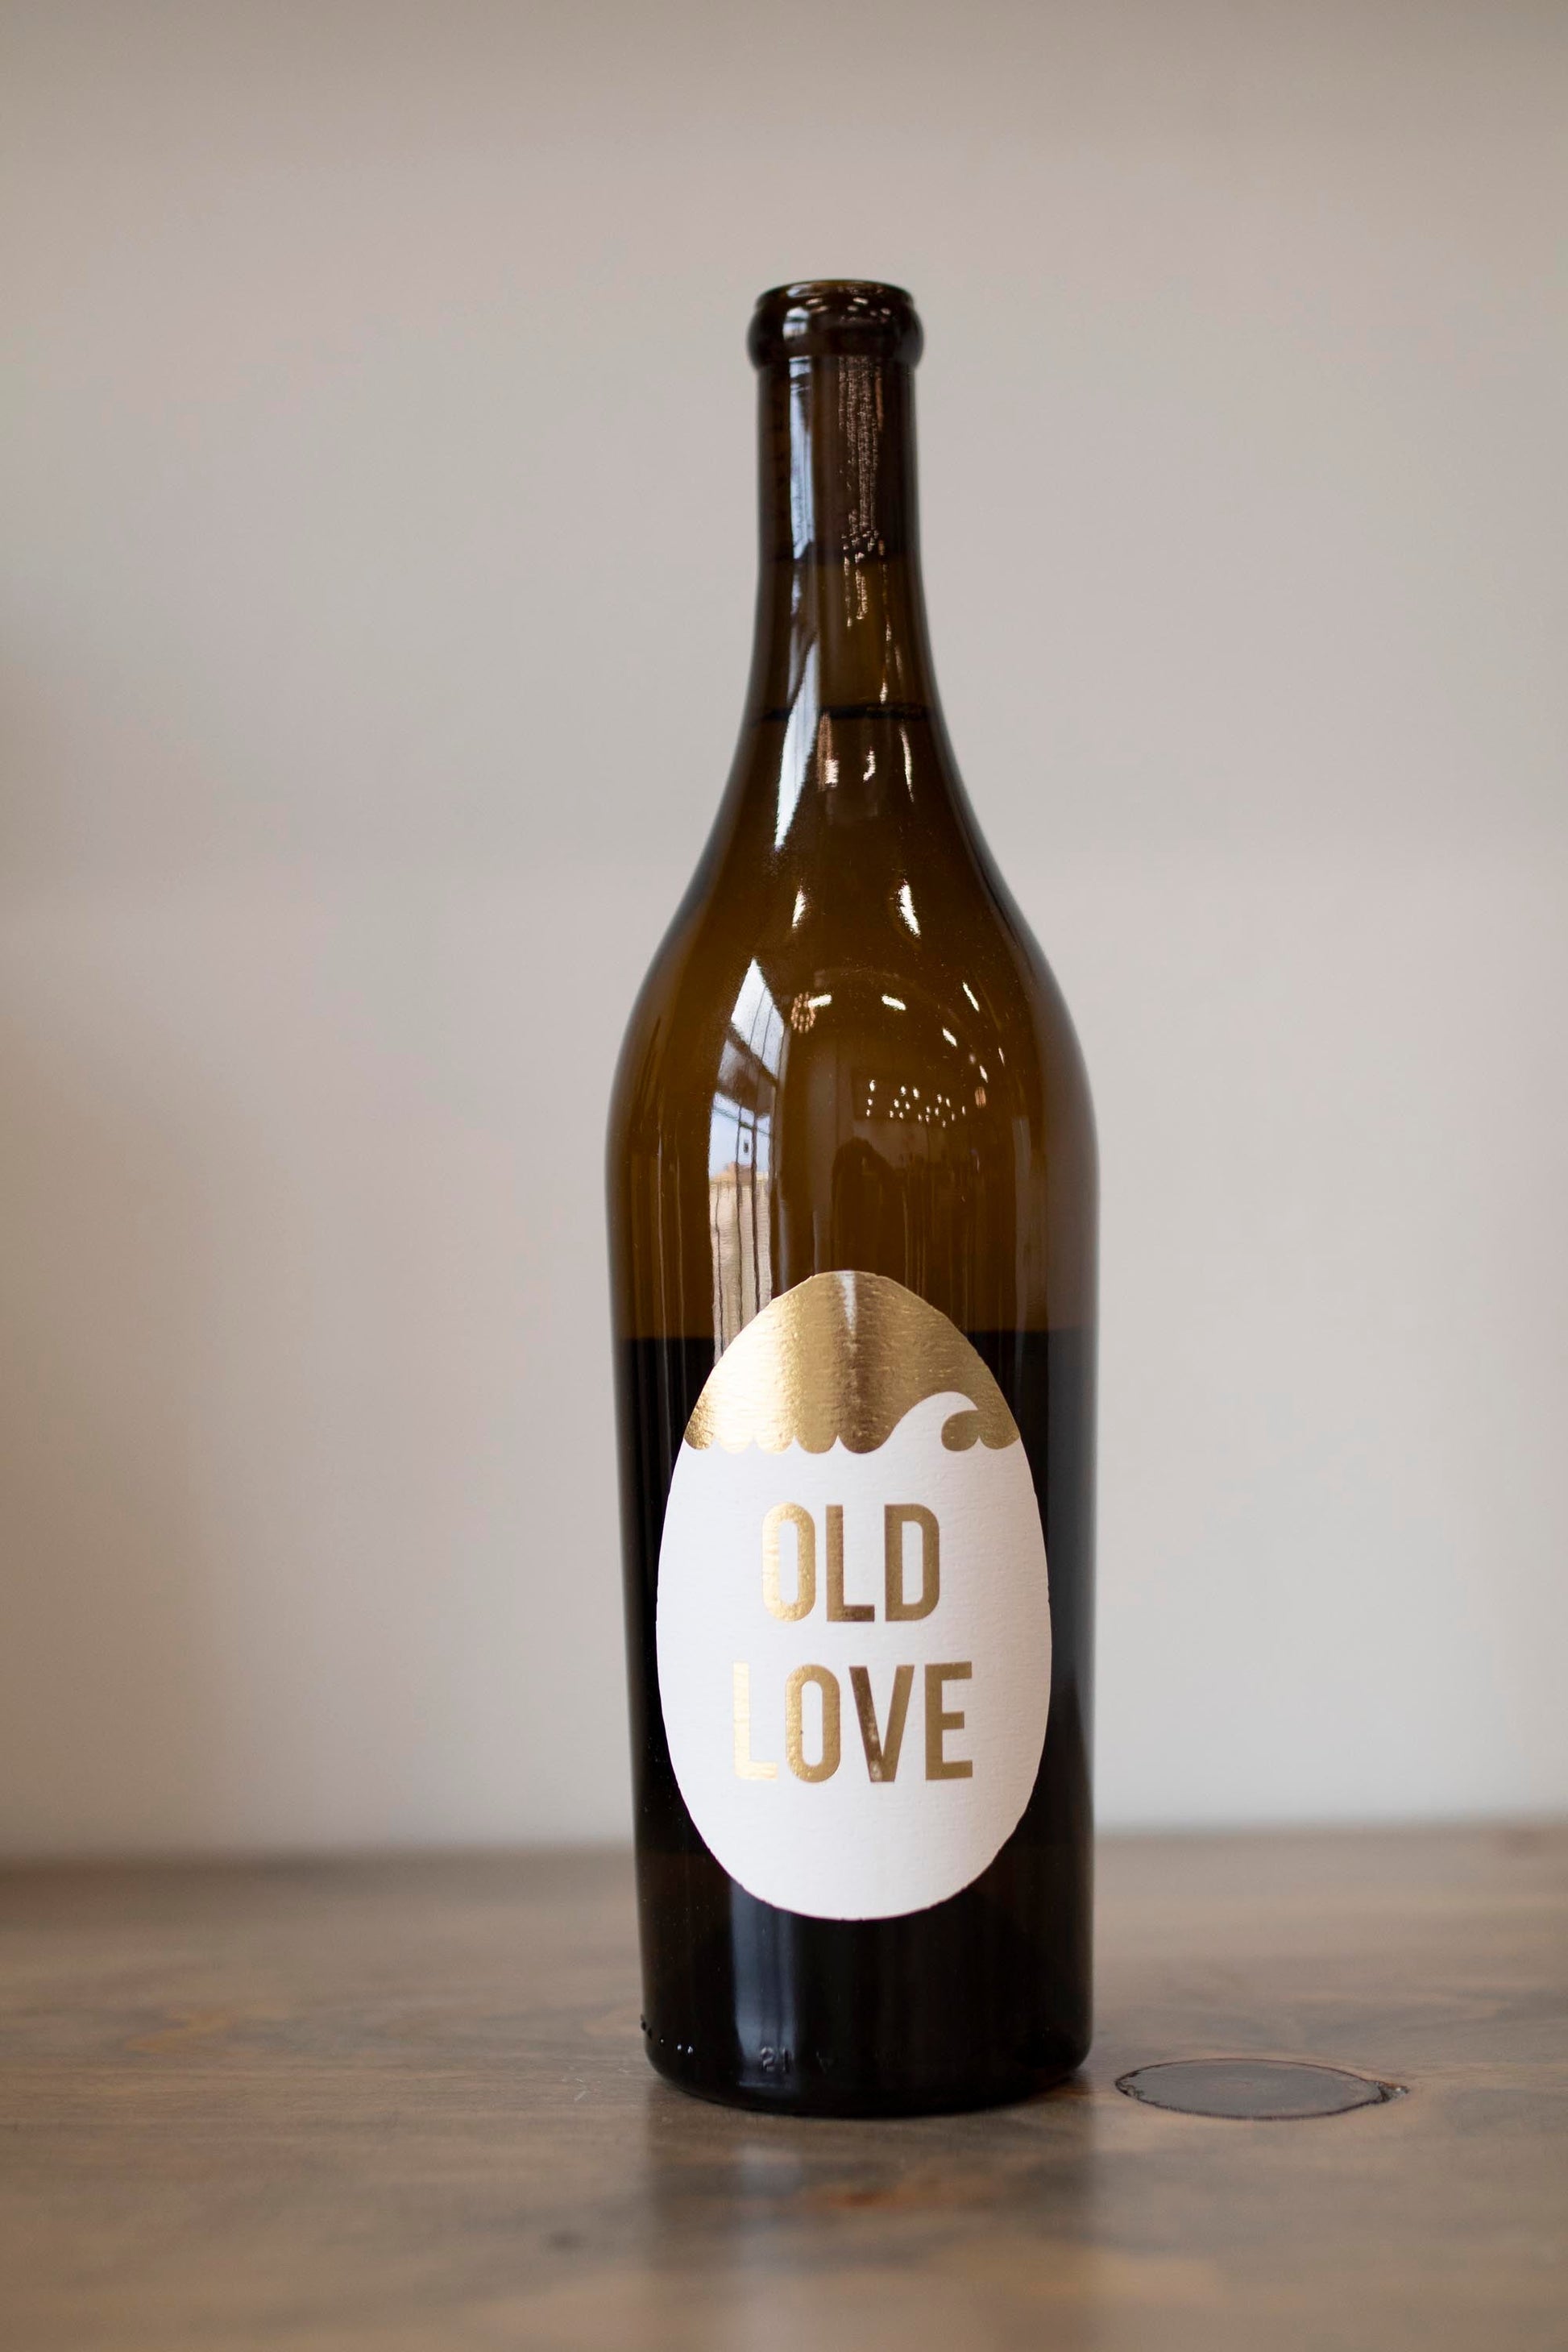 Bottle of Ovum Old Love found at Vine & Board in 3809 NW 166th St Suite 1, Edmond, OK 73012